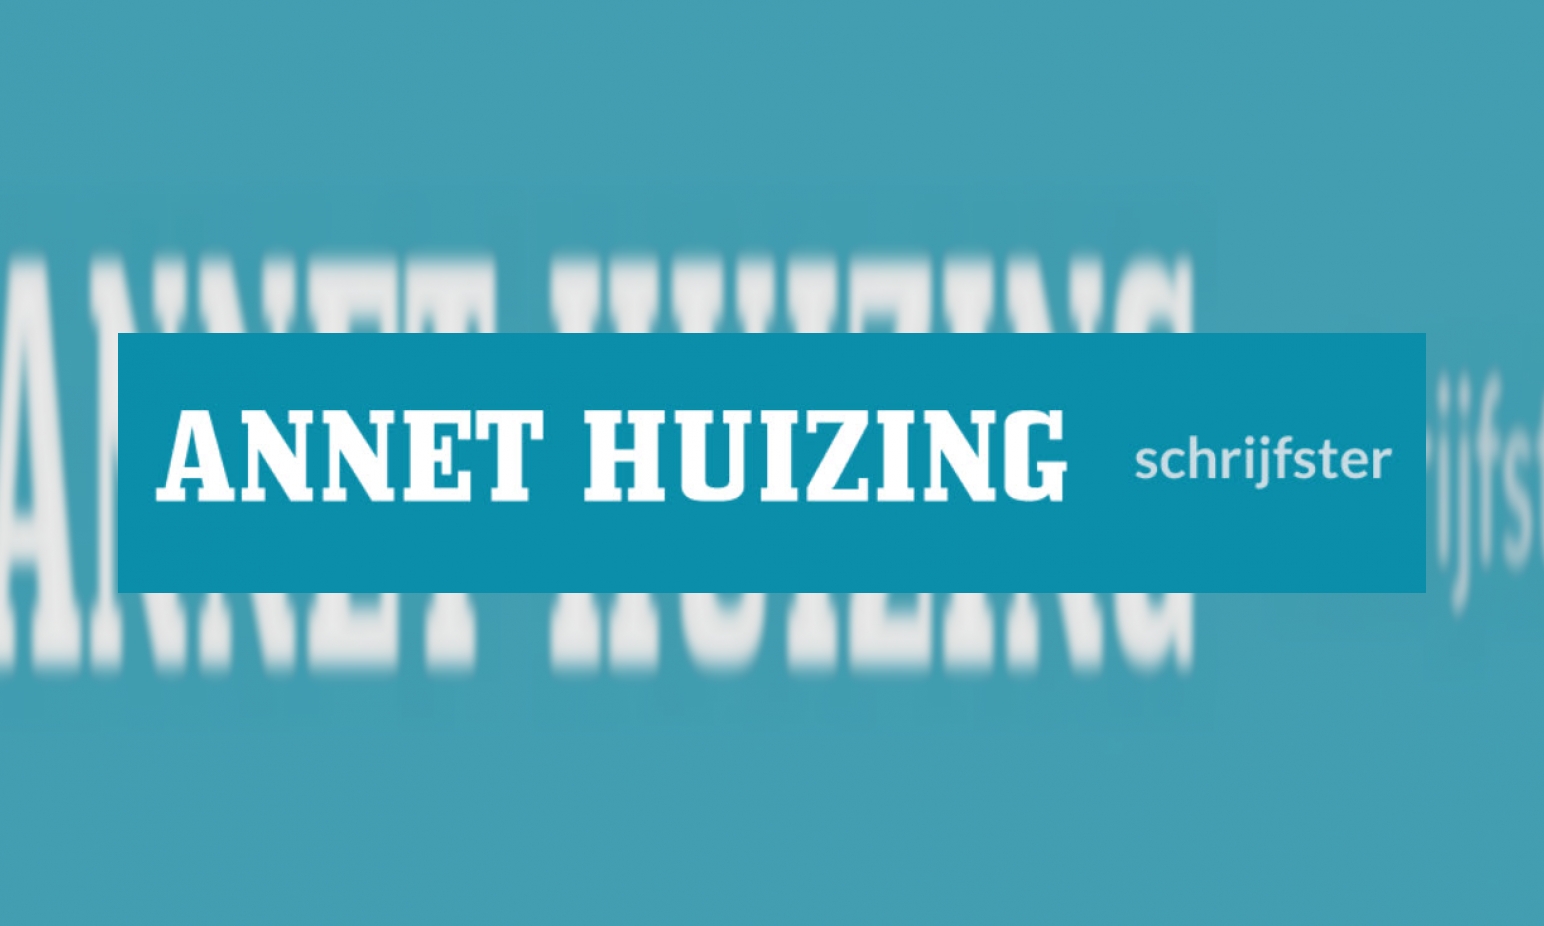 Annet Huizing